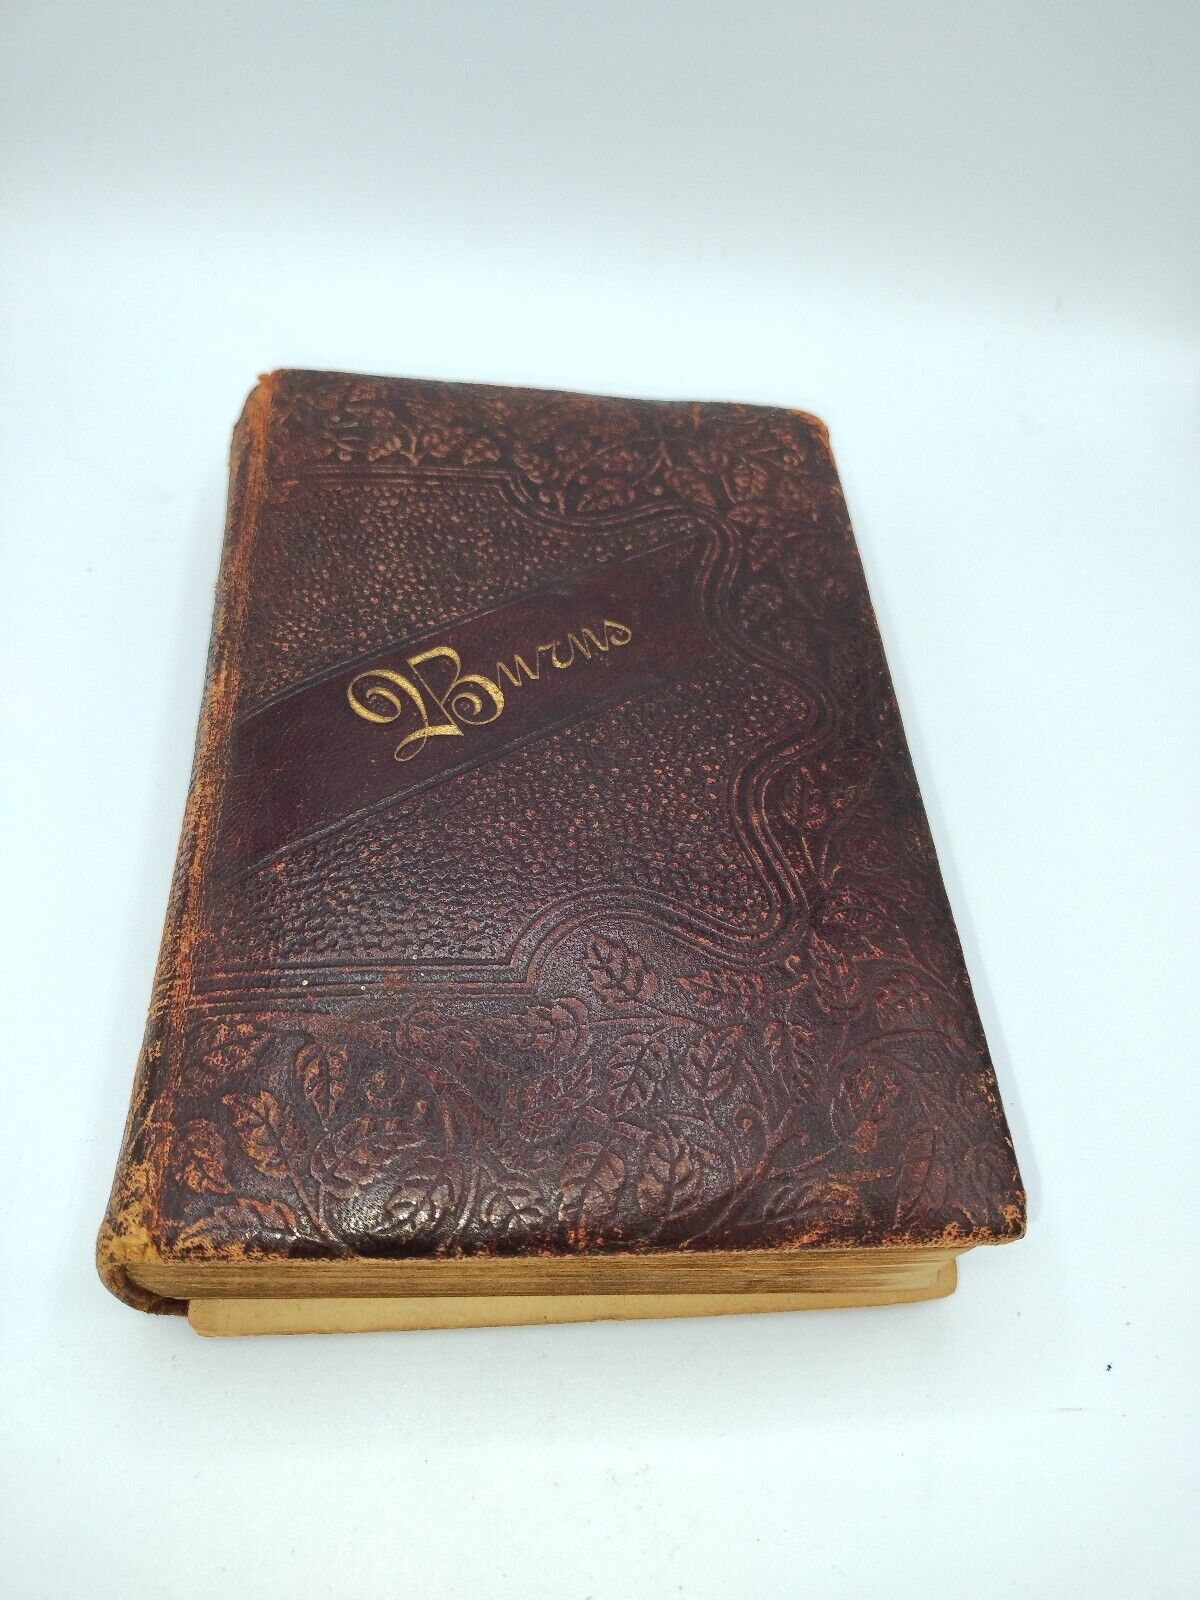 The Complete Works Of Robert Burns Published 1890s richly Leather Bound Gd cond